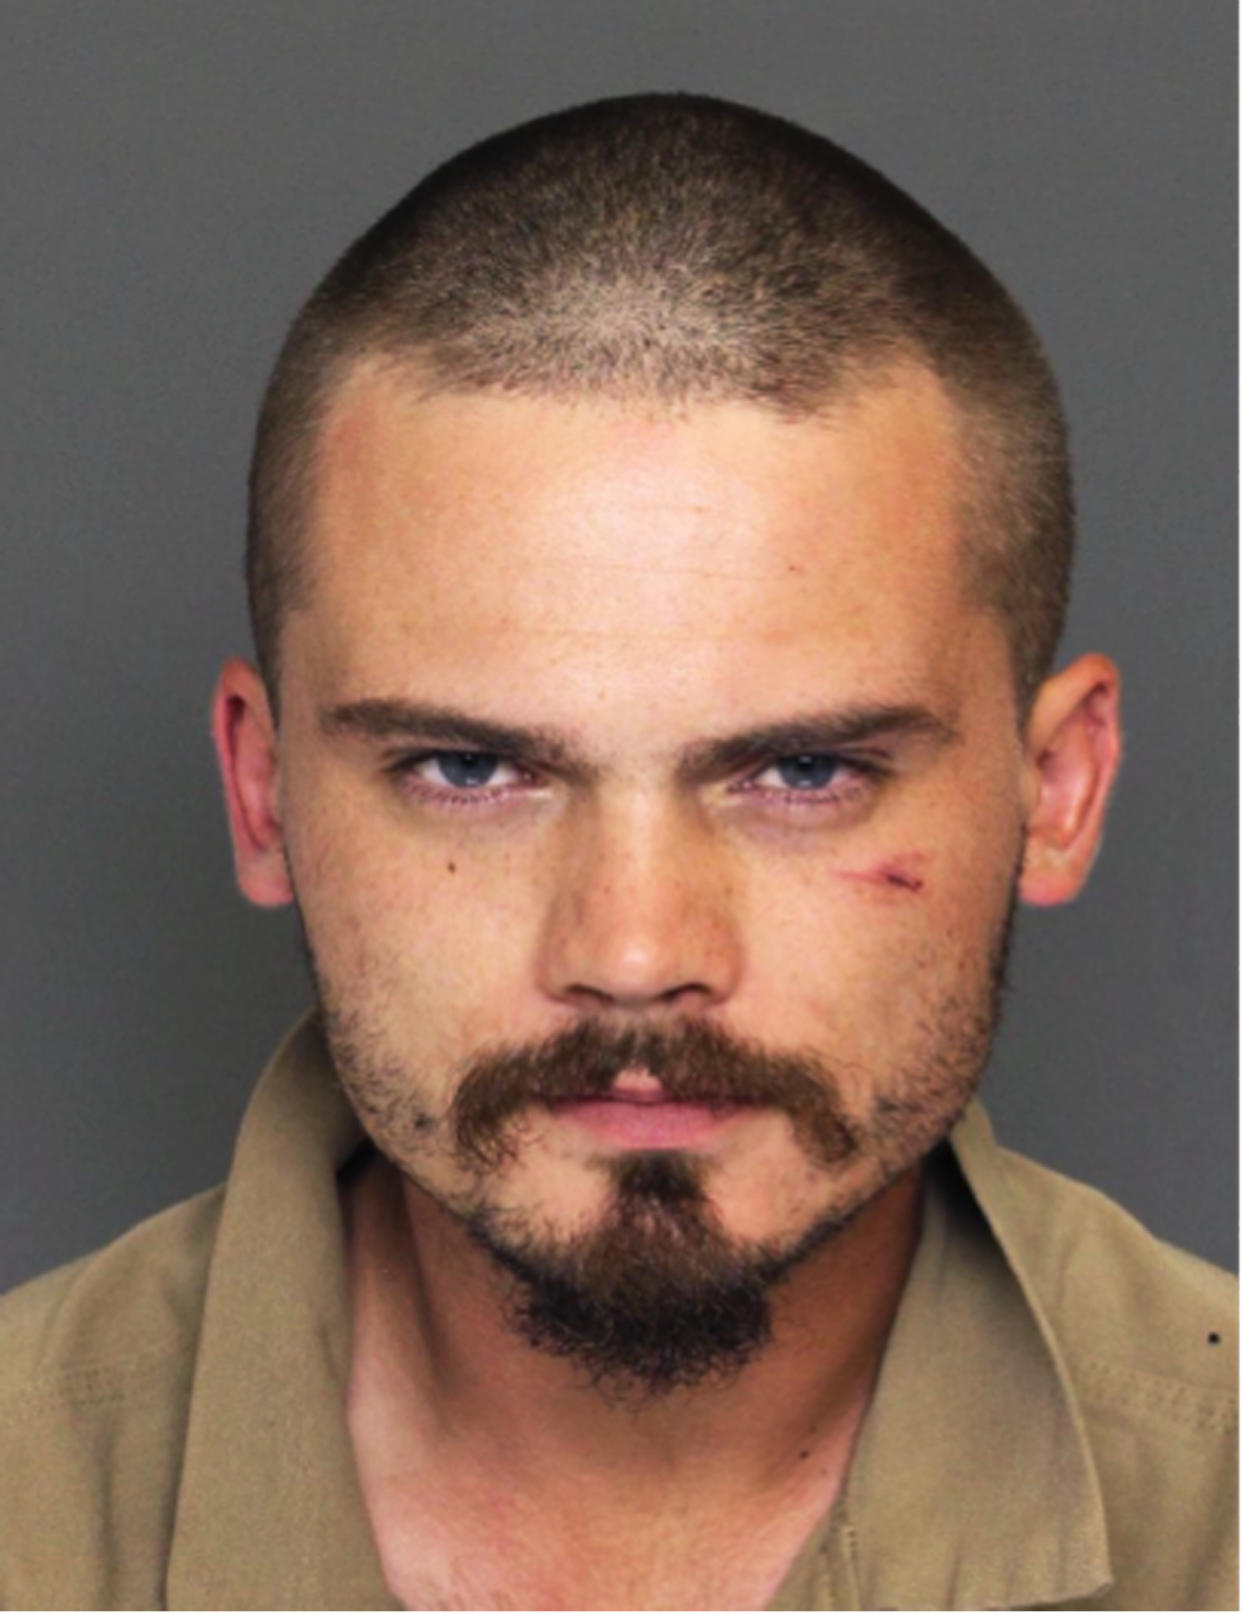 This Wednesday, June 17, 2015 law enforcement booking photo provided by the Colleton County, S.C., Sheriff's Office shows former "Star Wars" actor Jake Lloyd, who was booked as Jake Broadbent, after he allegedly lead deputies on a chase hitting speeds over 100 mph Wednesday at the Colleton County Detention Center, in Walterboro, S.C. Colleton County, South Carolina, Sheriff's Sgt. Kyle Strickland said Sunday  June 21, 2015, that deputies on Wednesday arrested a 26-year-old man they confirmed through a former talent agent was Jake Lloyd. Strickland said the man gave his name as Jake Broadbent. He played young Anakin Skywalker in the 1999 movie "Star Wars: Episode I - The Phantom Menace." (Colleton County Sheriff's Office via AP)